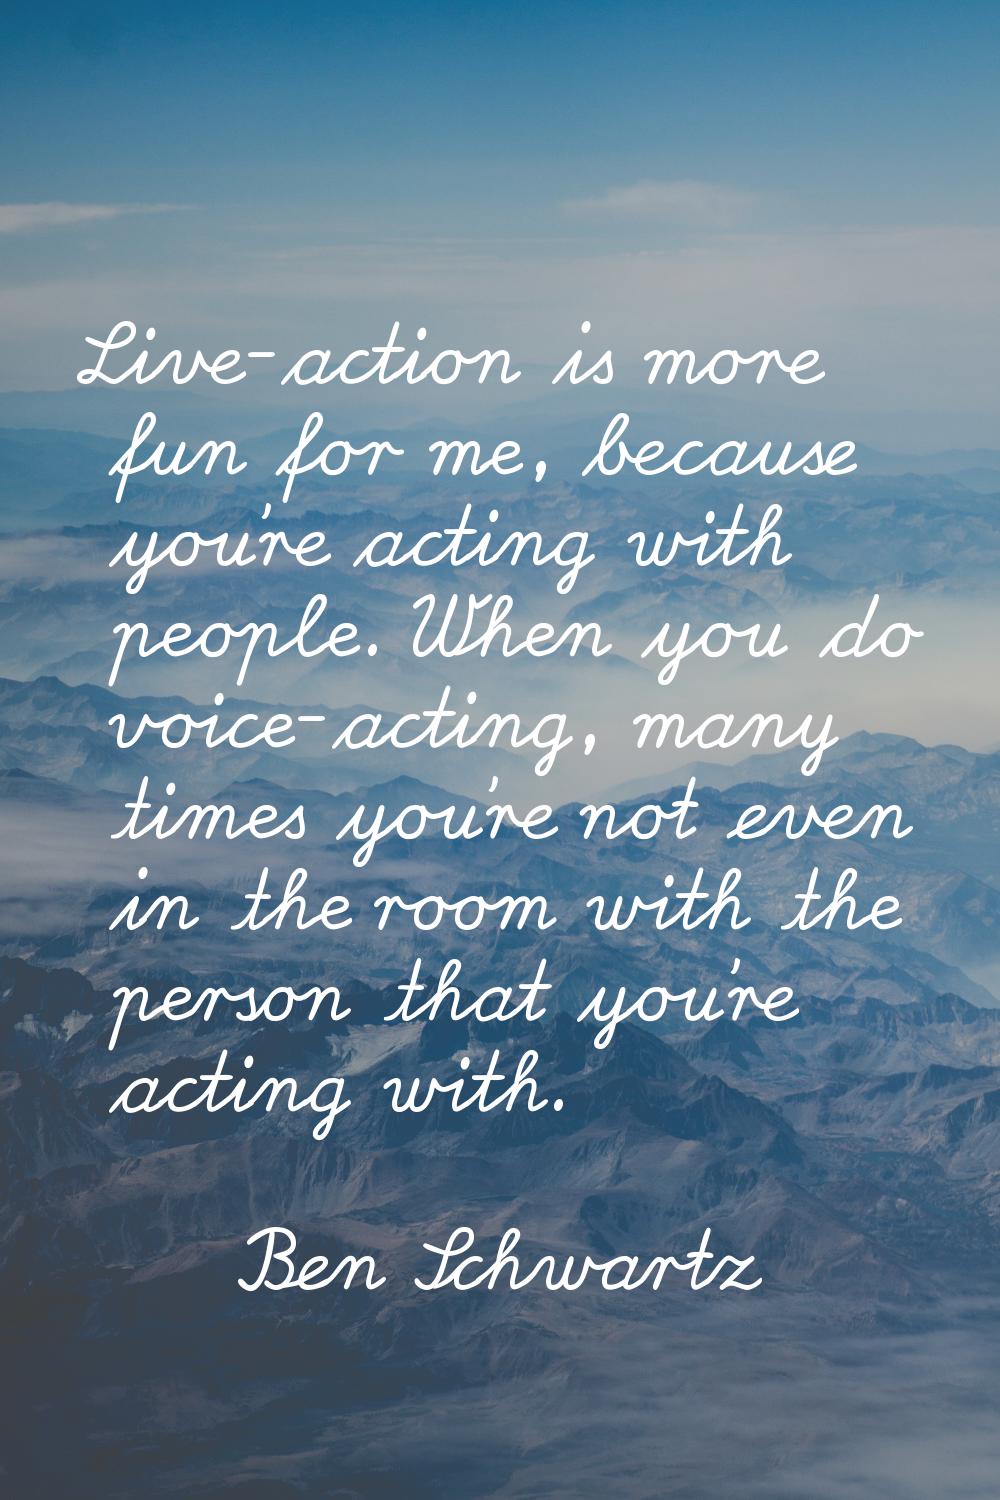 Live-action is more fun for me, because you're acting with people. When you do voice-acting, many t